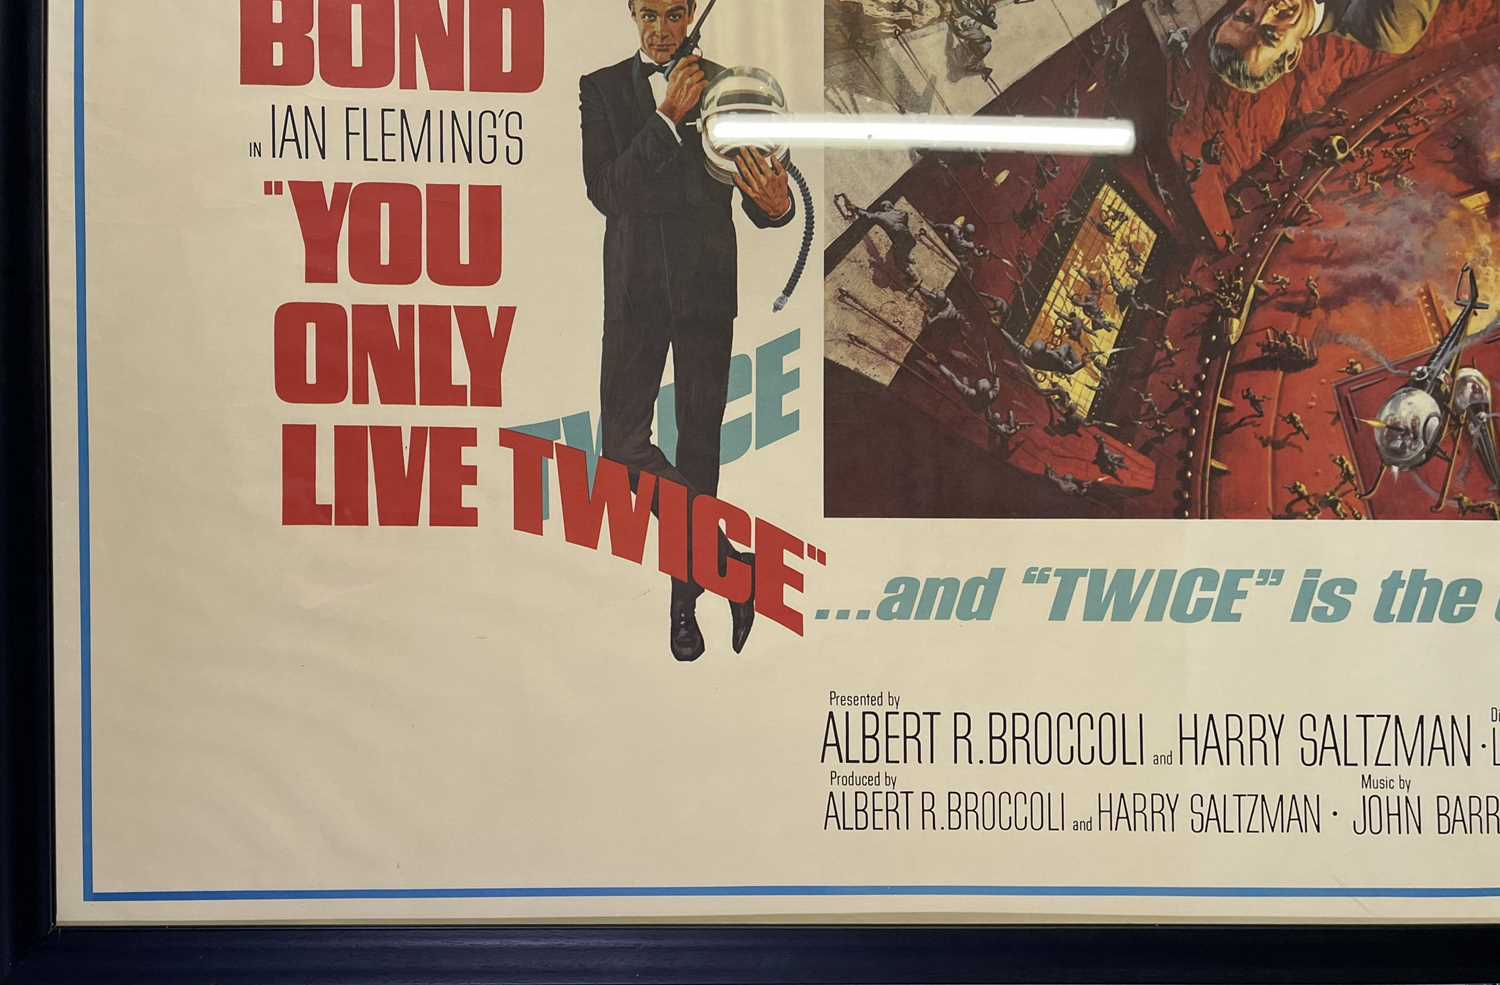 JAMES BOND - YOU ONLY LIVE TWICE (1967) - US DRIVE-IN POSTER. - Image 3 of 6